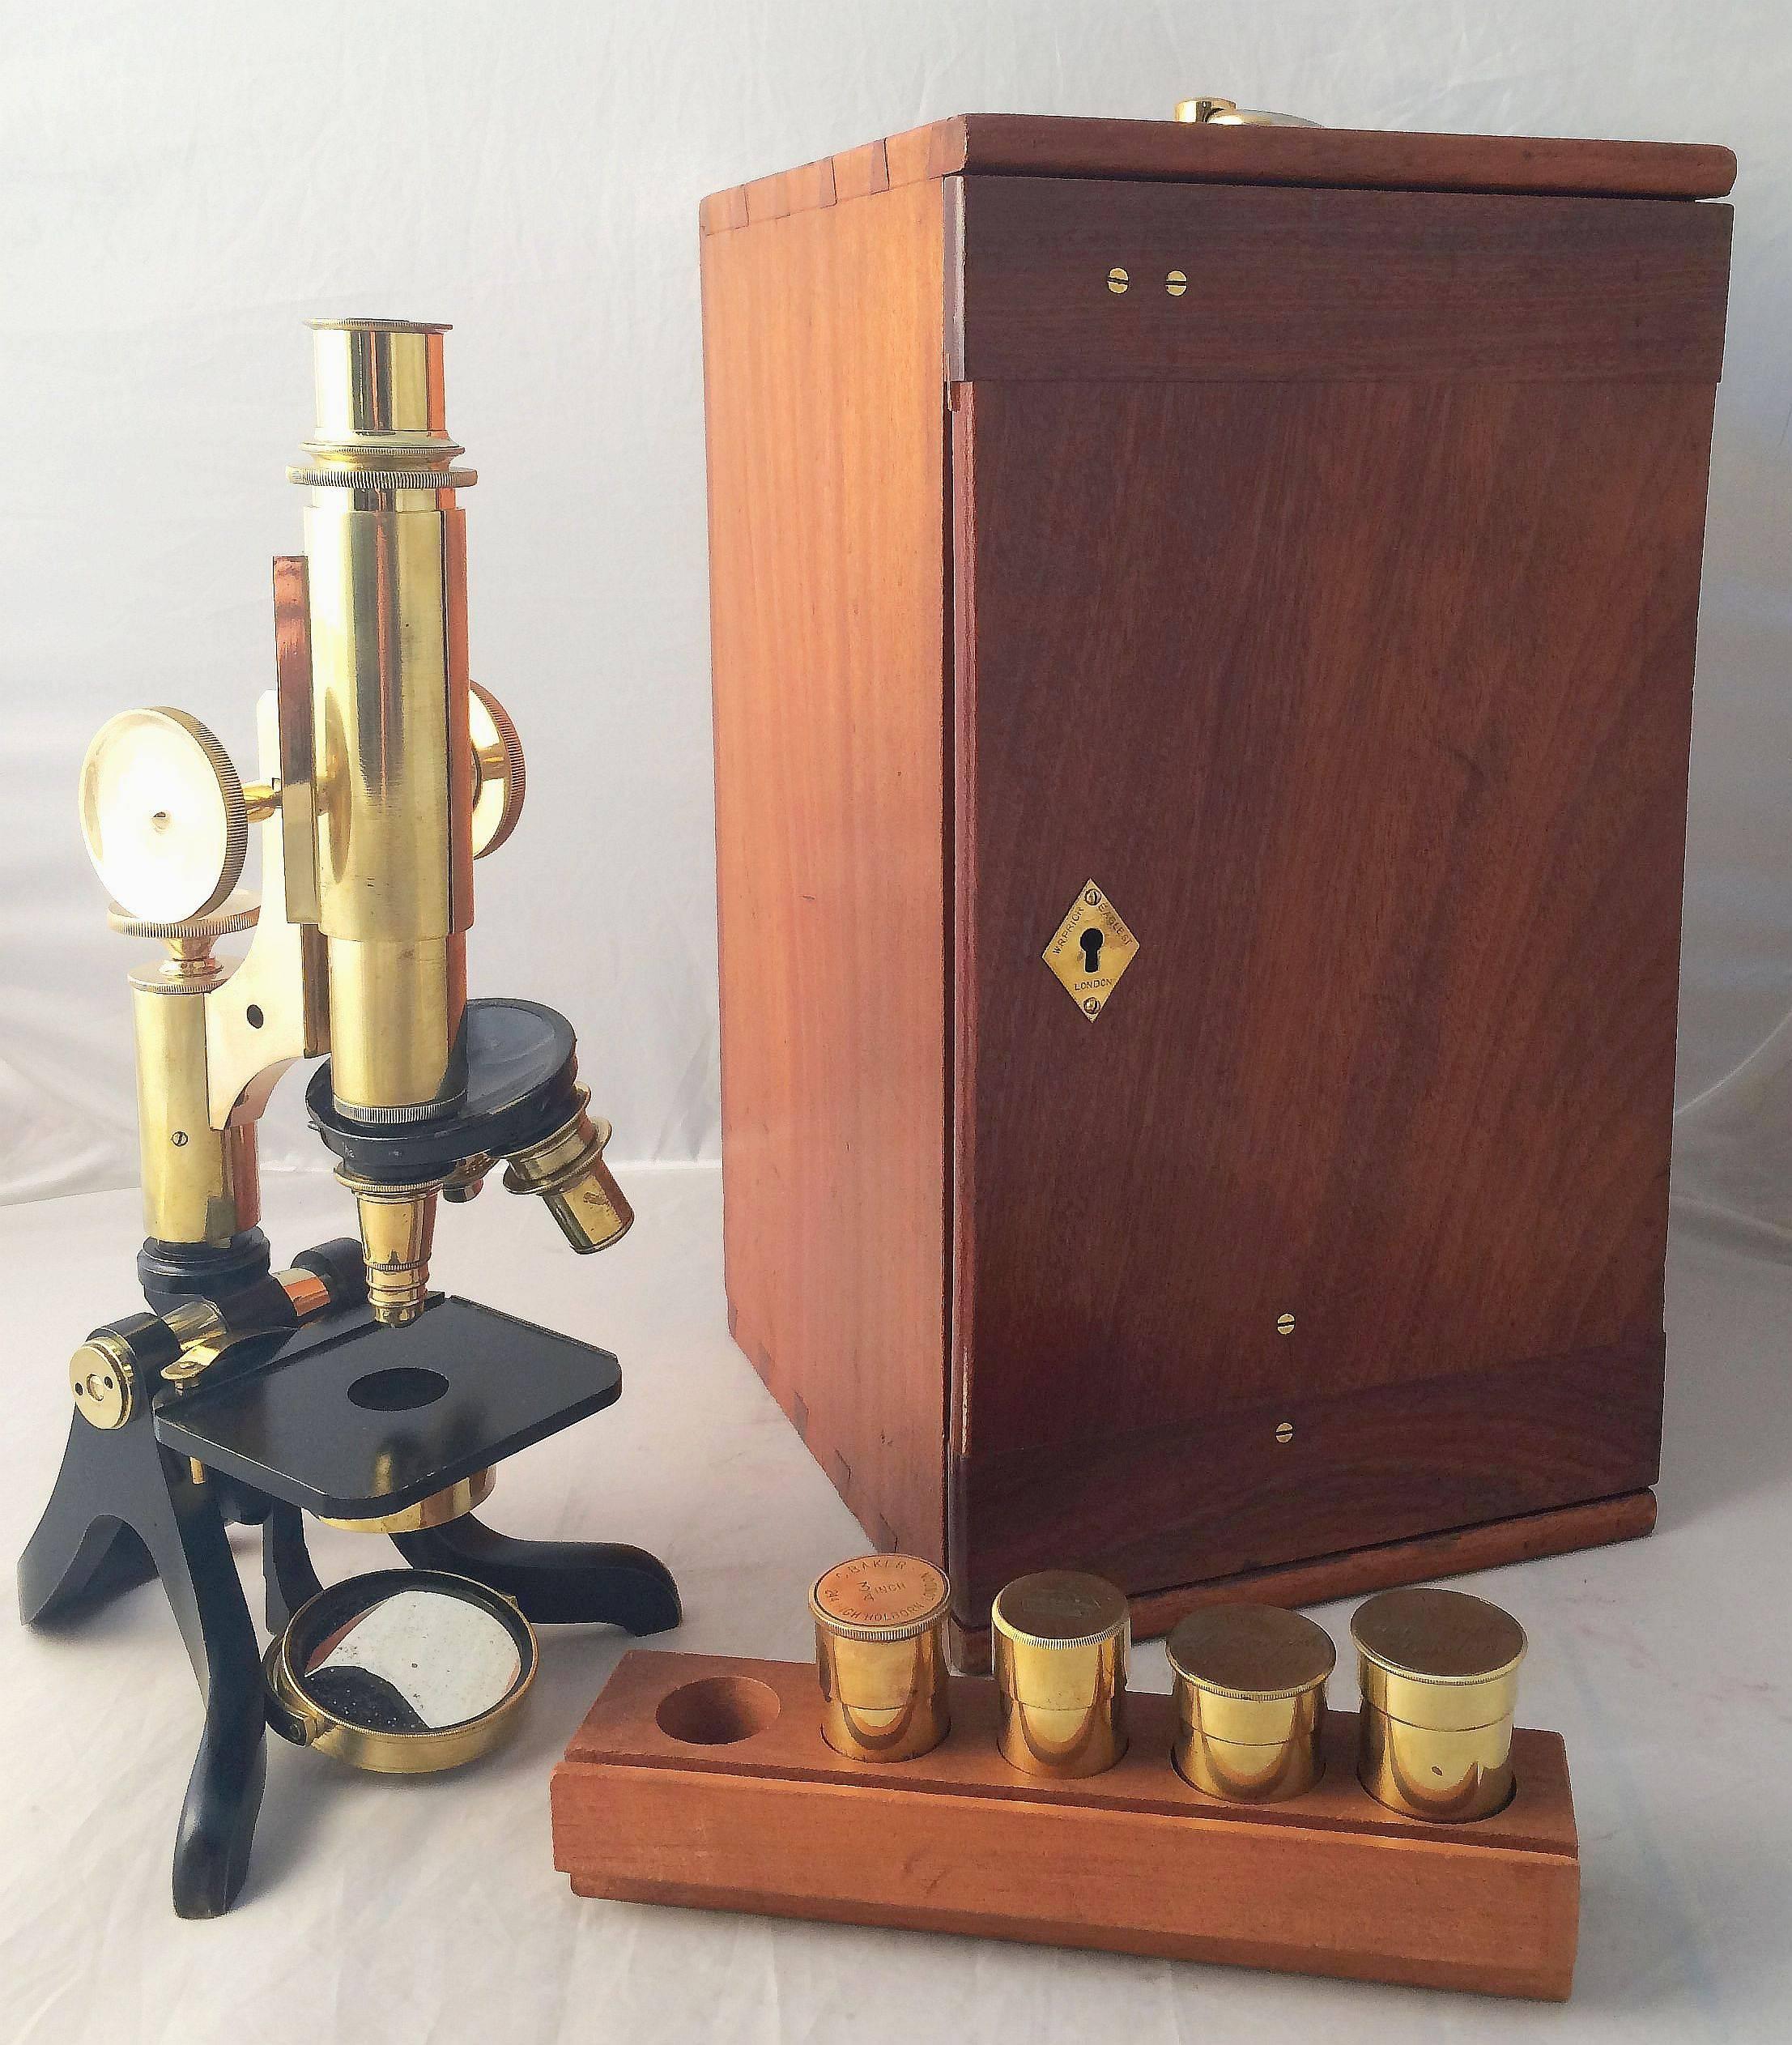 Mirror Compound Microscope with Box and Key by Henry Crouch of London, No.4016